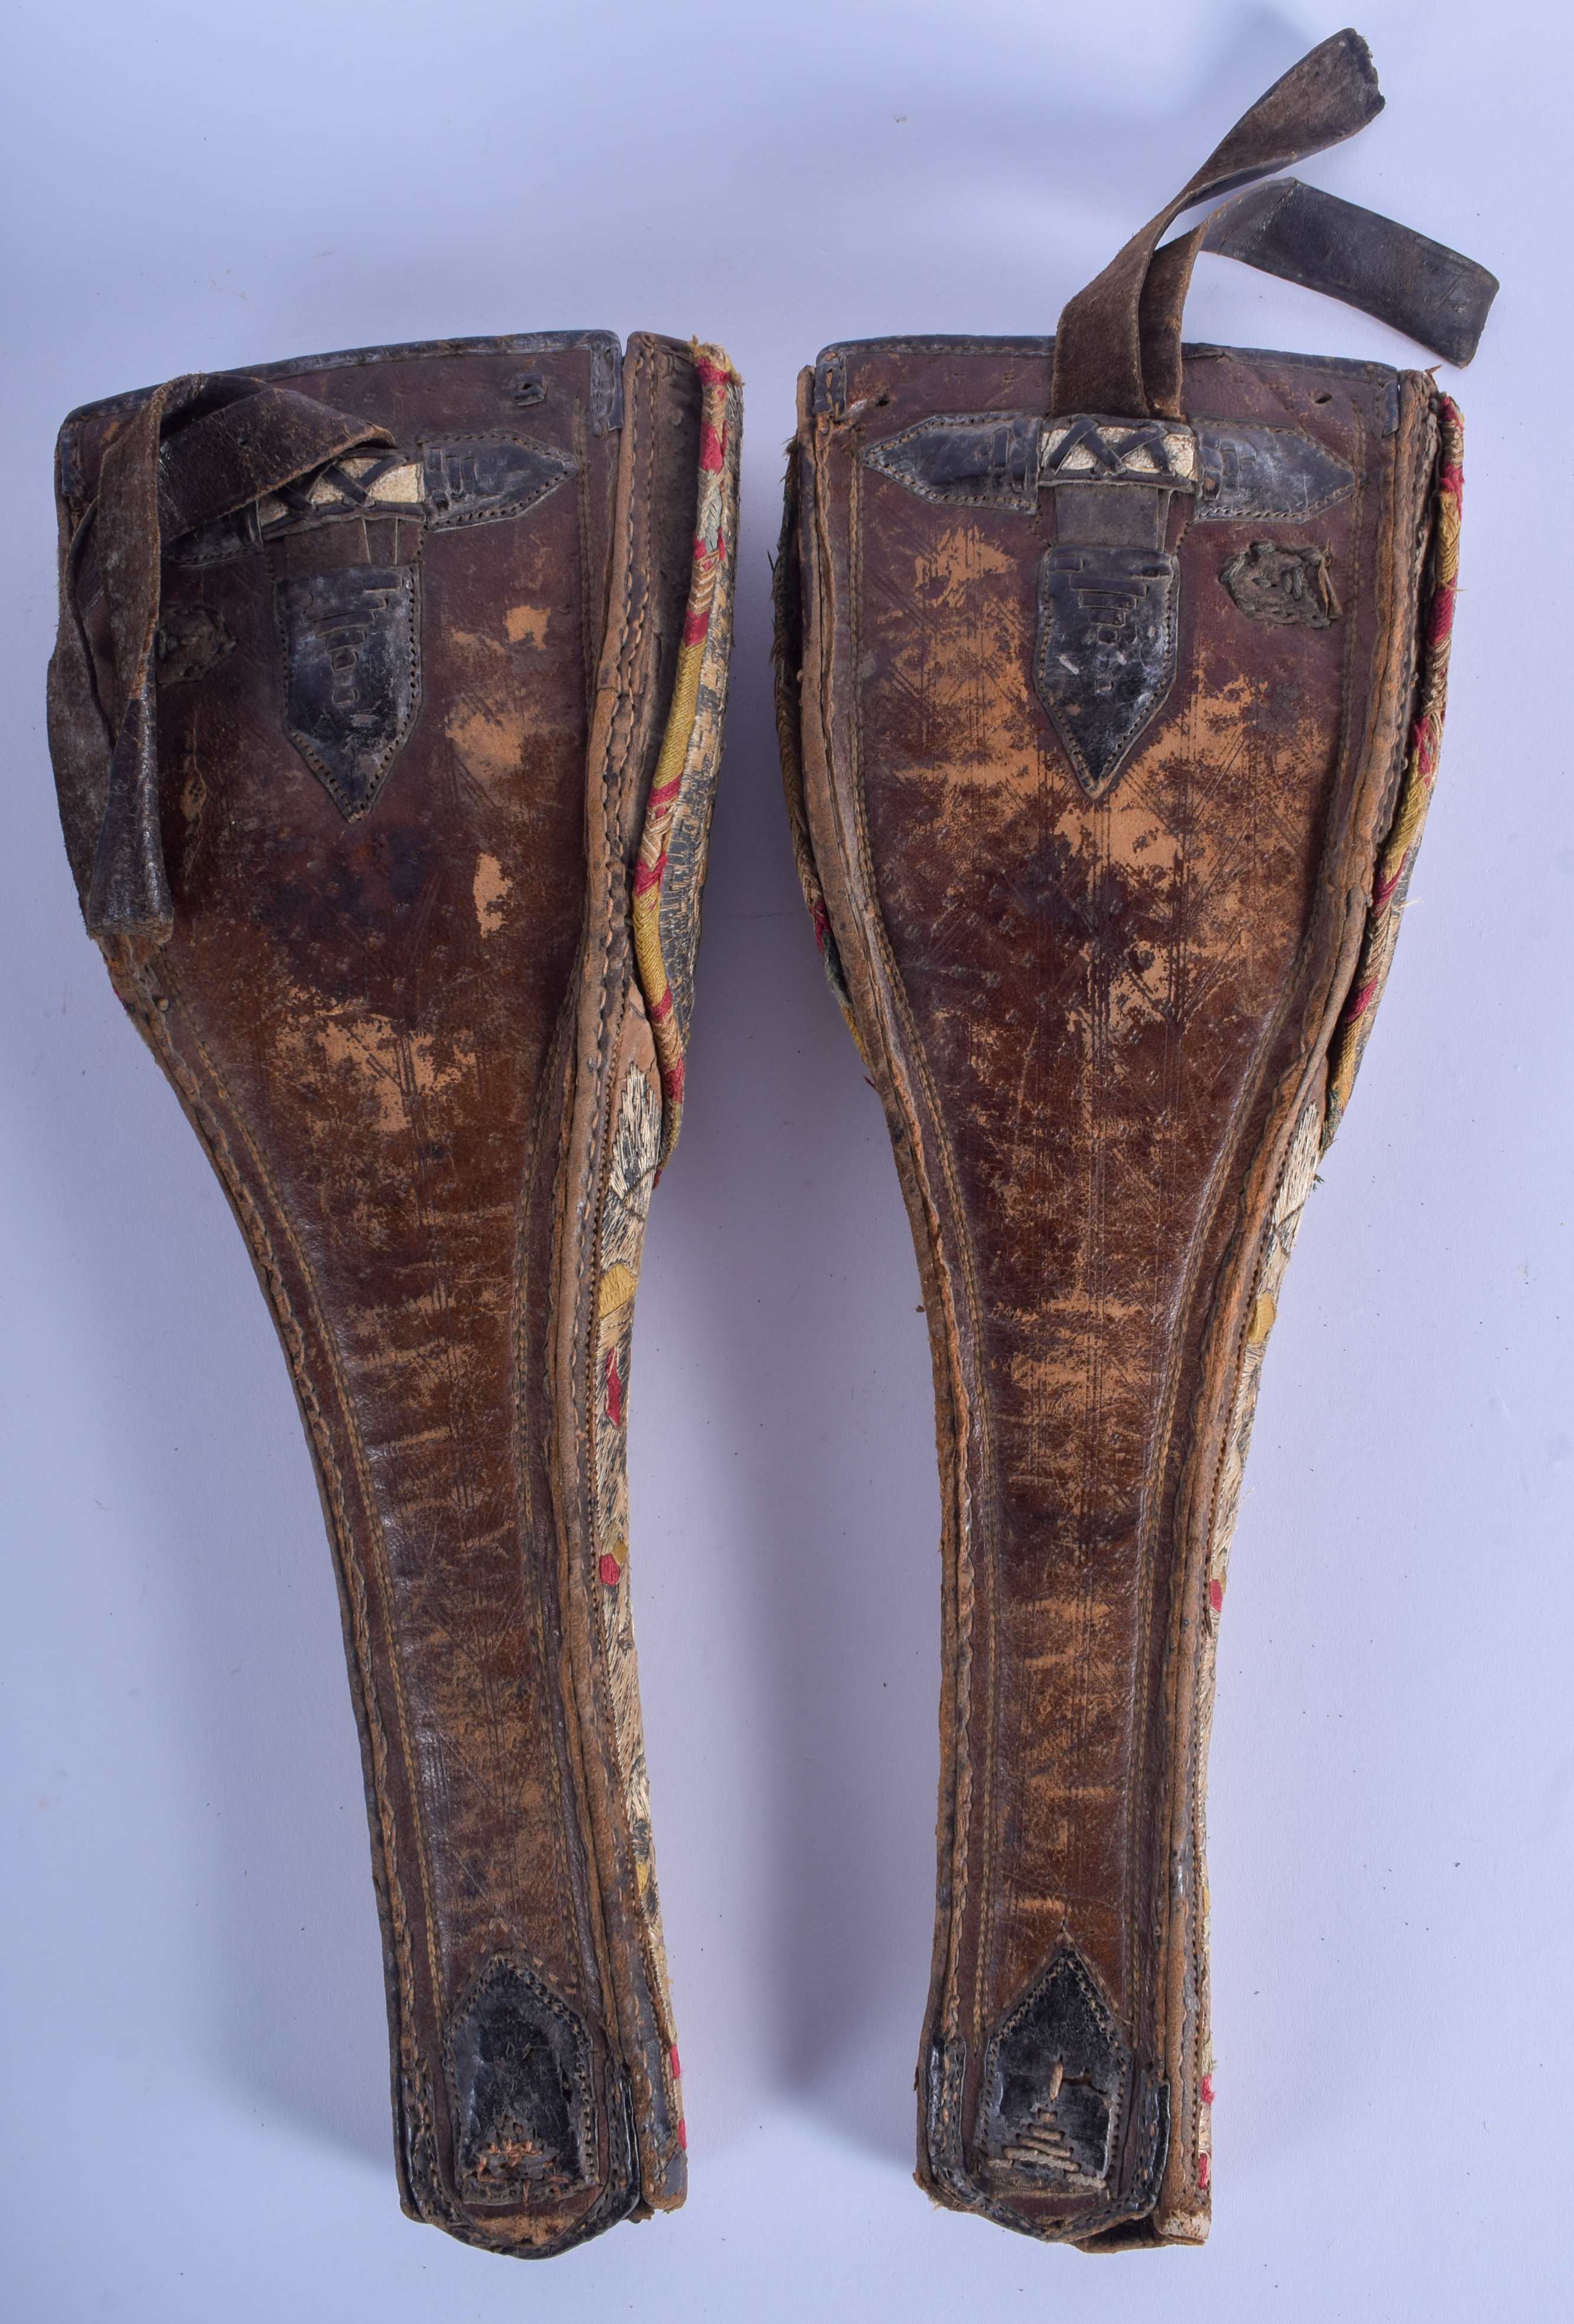 A PAIR OF 19TH CENTURY TURKISH OTTOMAN GUN CASES decorated with yellow and red motifs. 40 cm x 15 cm